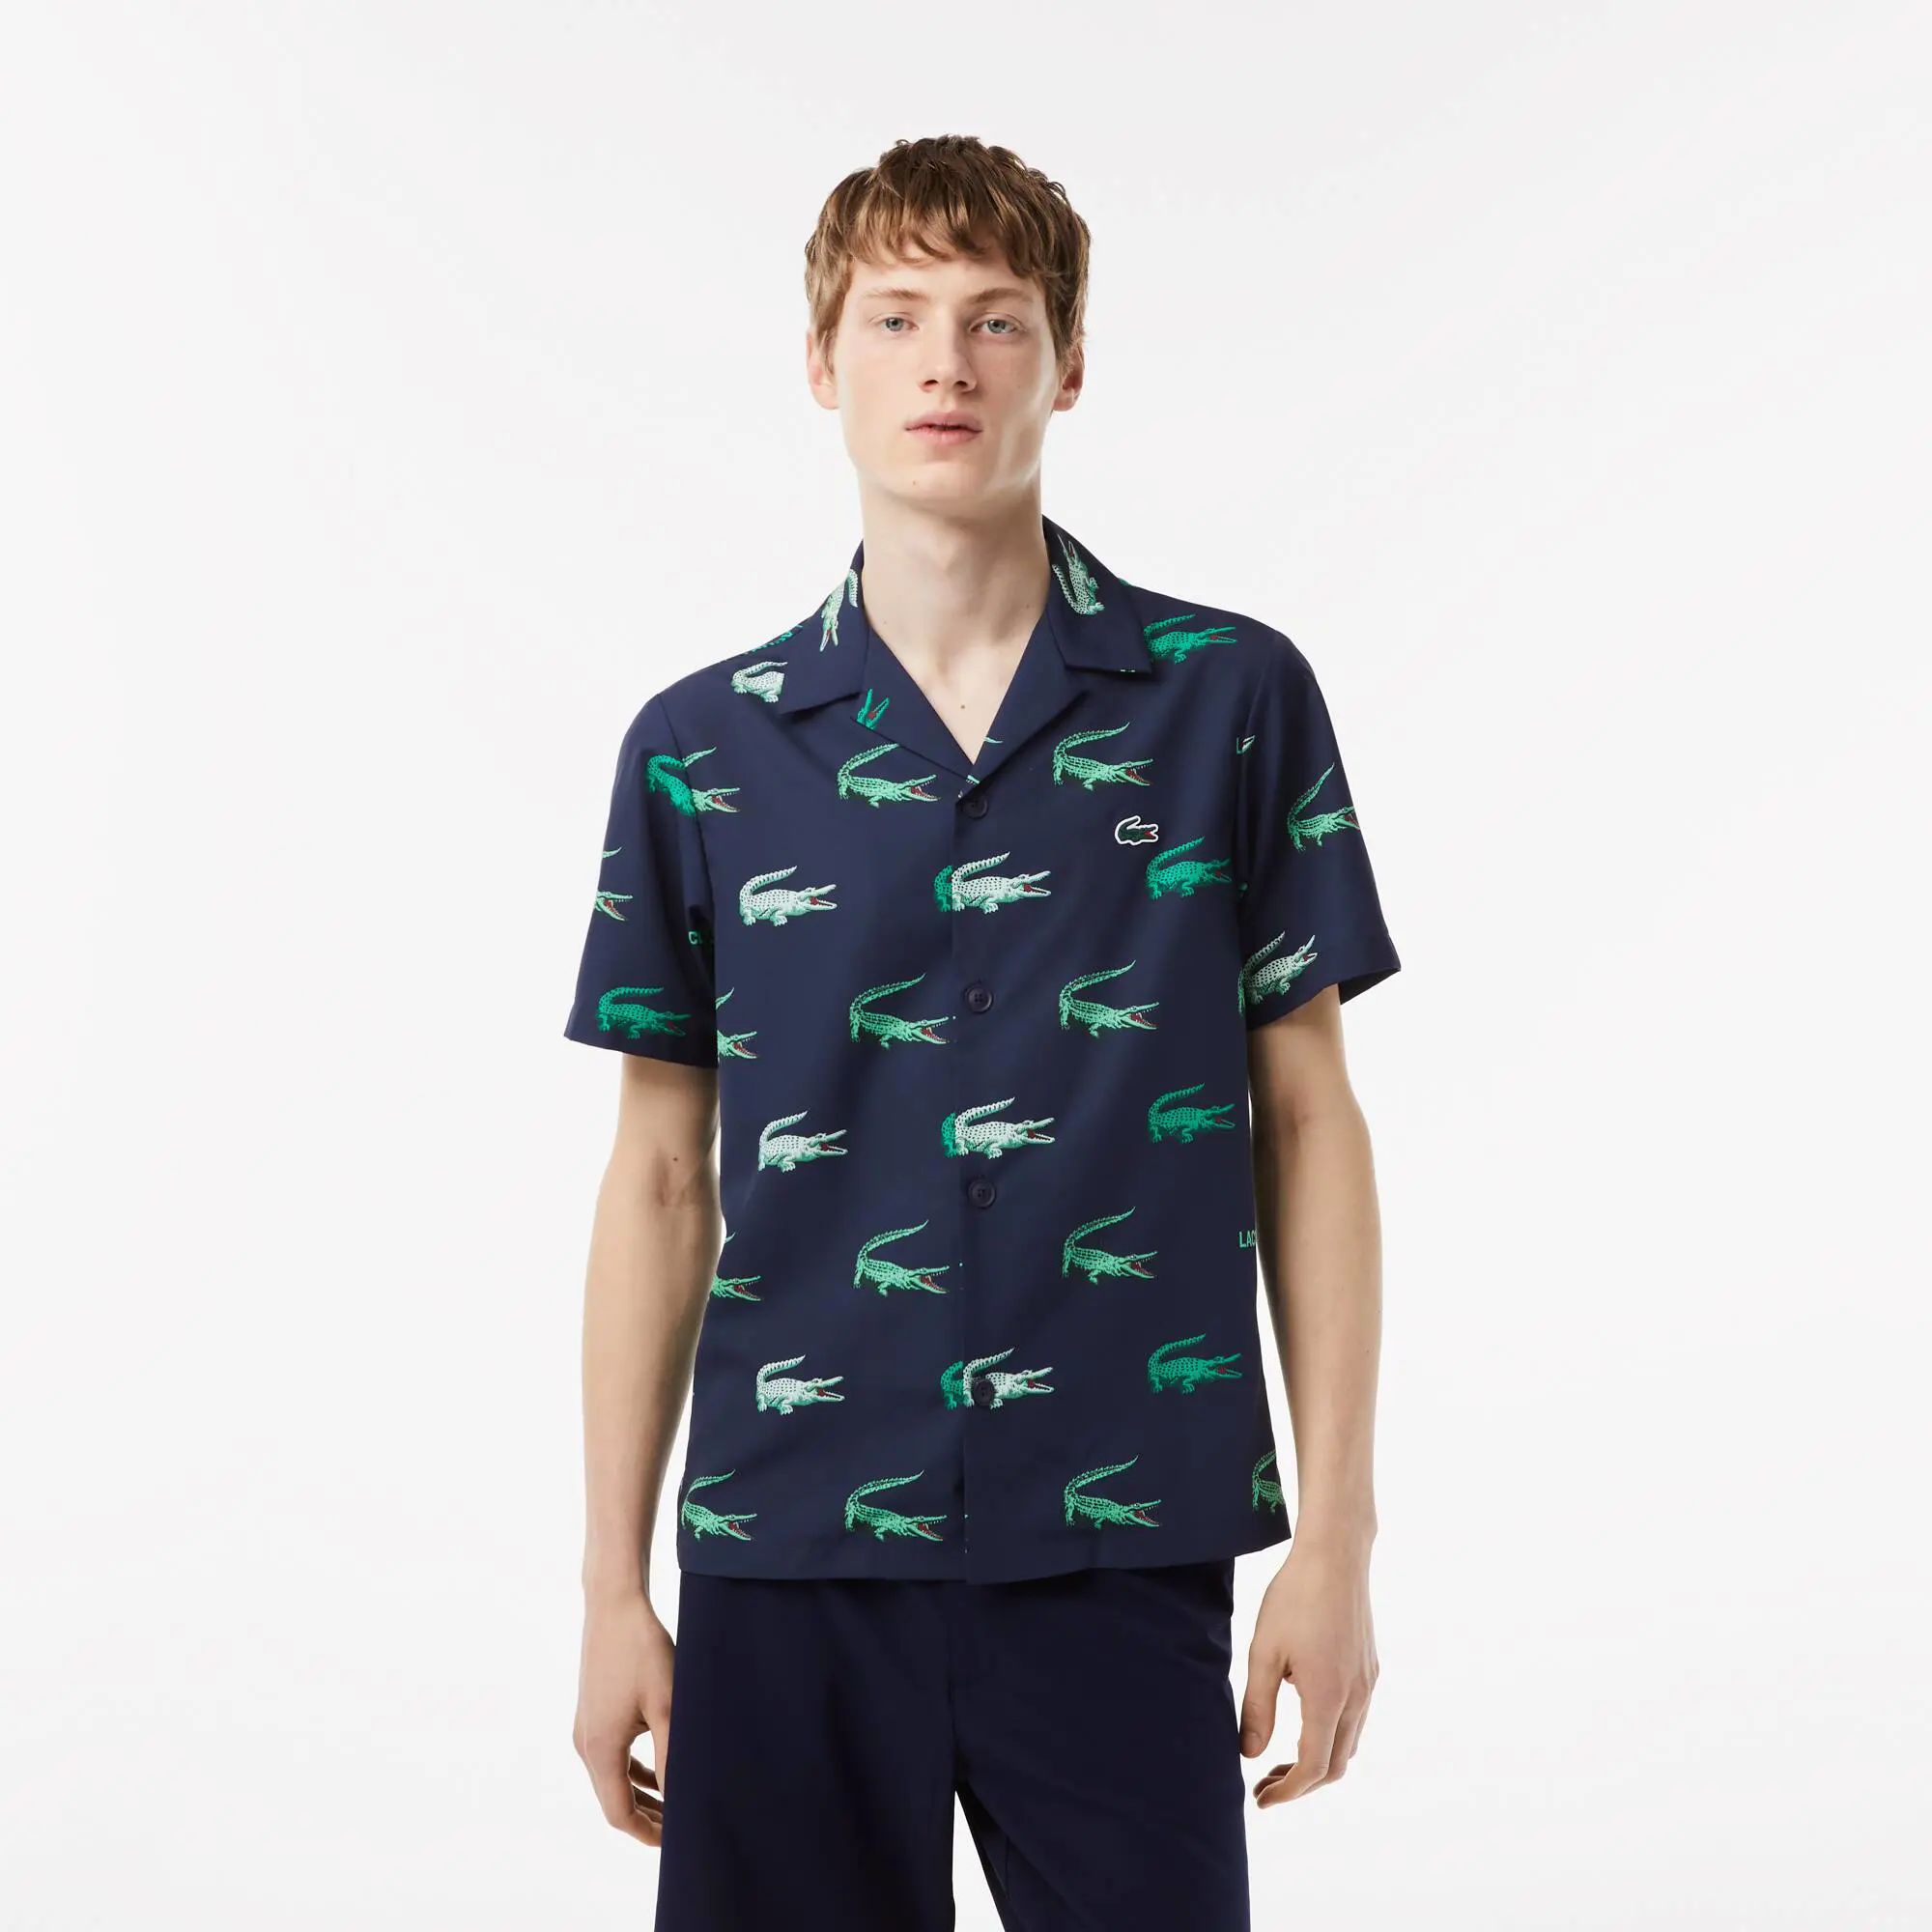 Lacoste Men’s Lacoste Golf Printed Short-Sleeved Shirt. 1